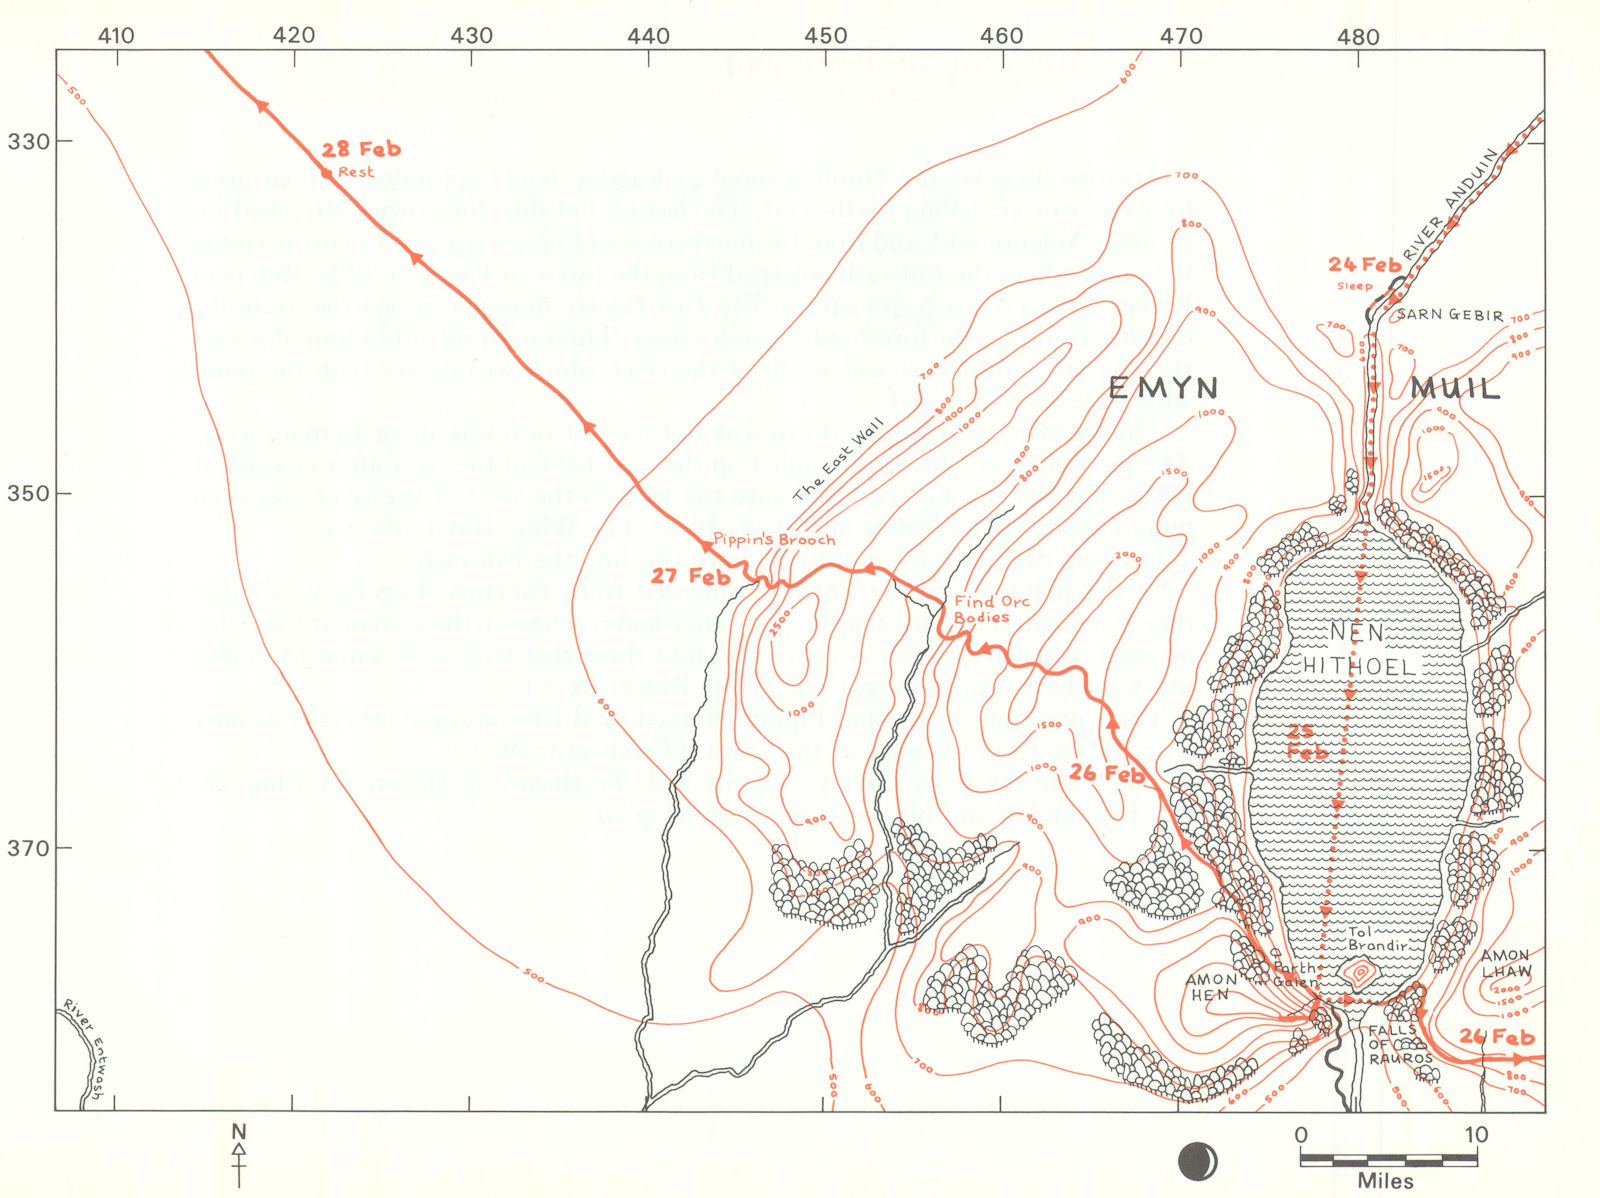 MIDDLE-EARTH Eastemnet & Nen Hithoel. Frodo's route. TOLKIEN/STRACHEY 1981 map